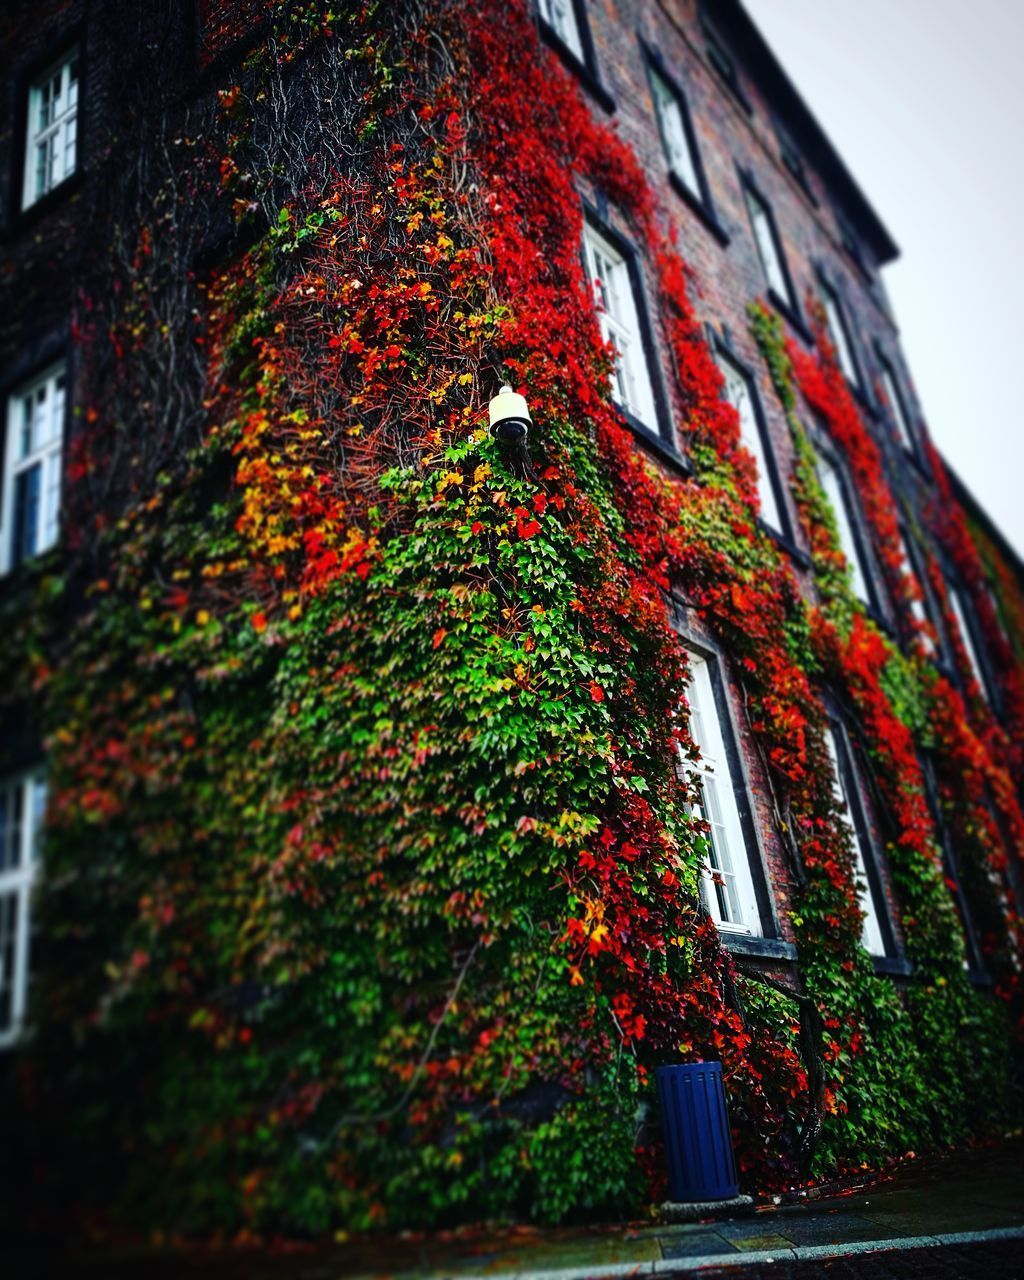 LOW ANGLE VIEW OF IVY GROWING ON BUILDING